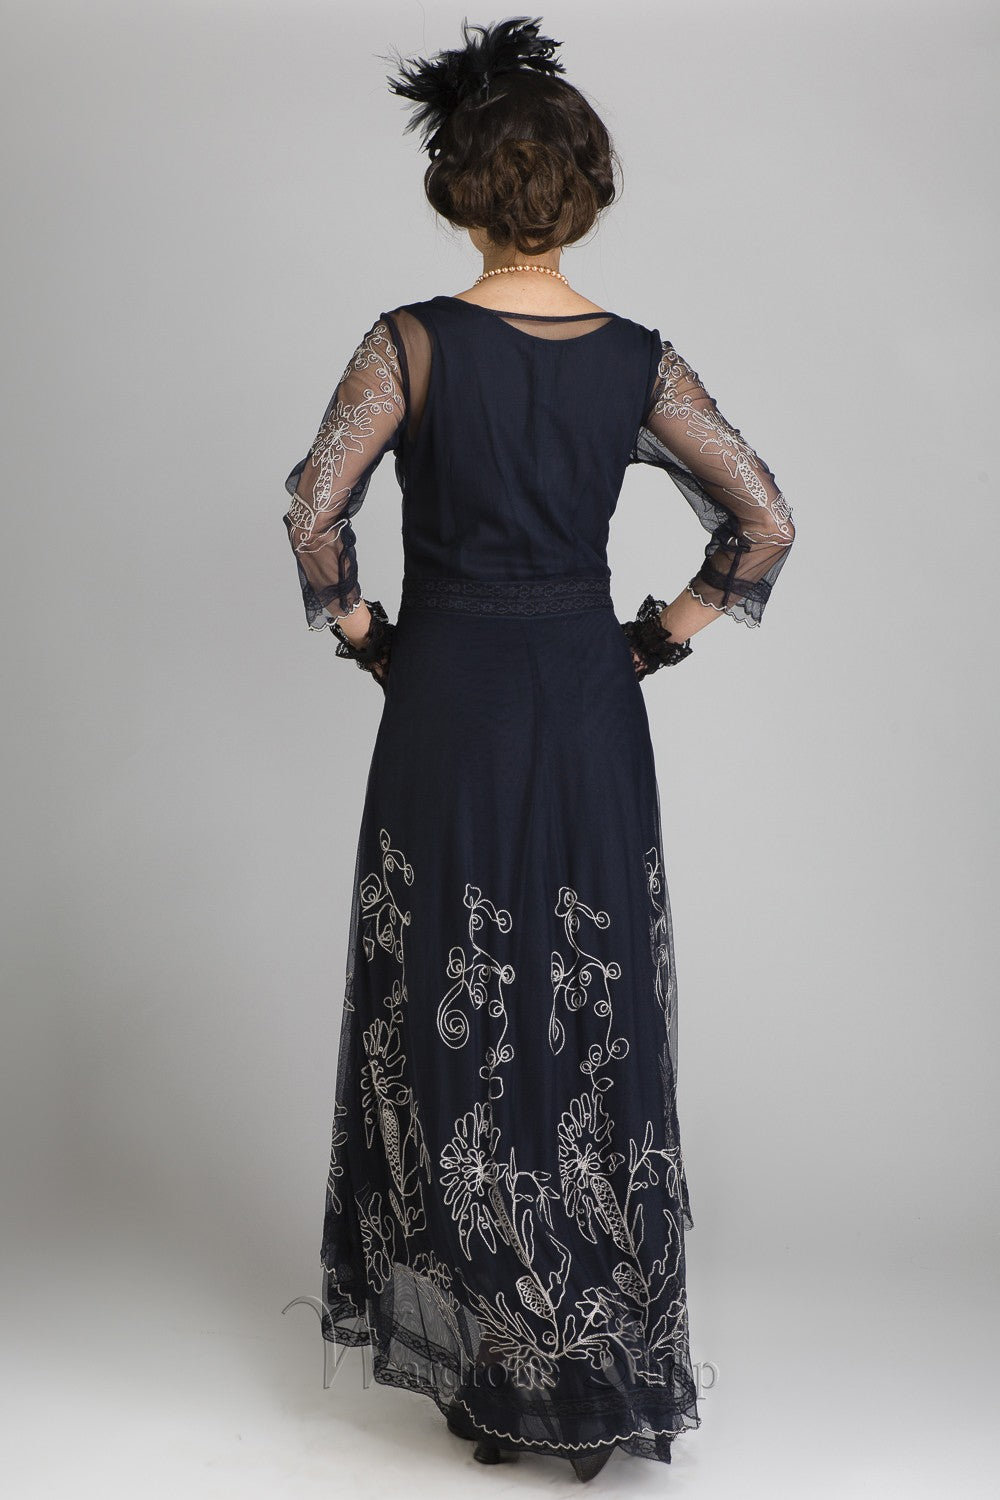 Downton Abbey Tea Party Gown in Sapphire by Nataya - SOLD OUT